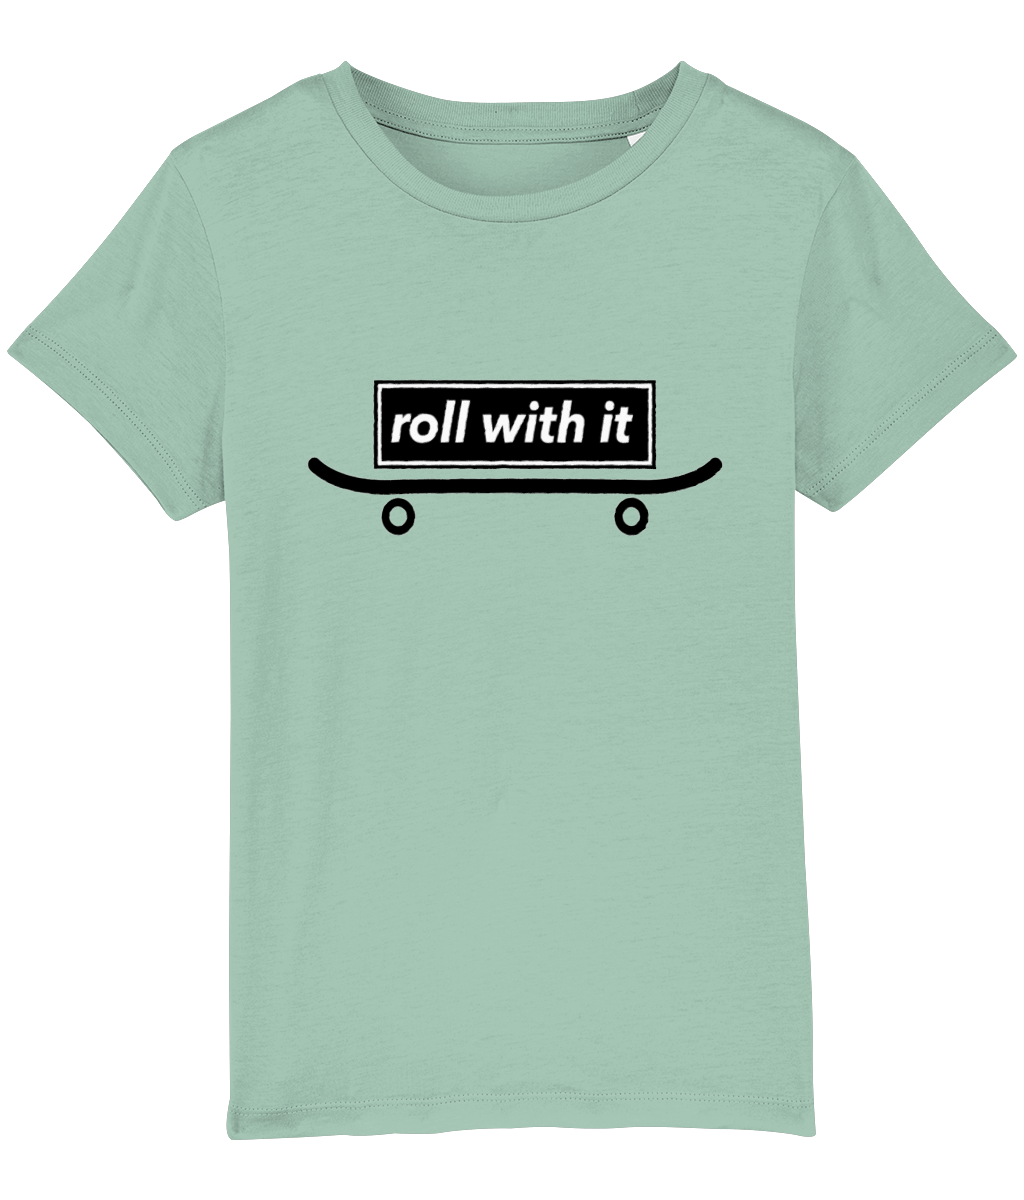 Organic Cotton Junior T Shirt, roll with it....